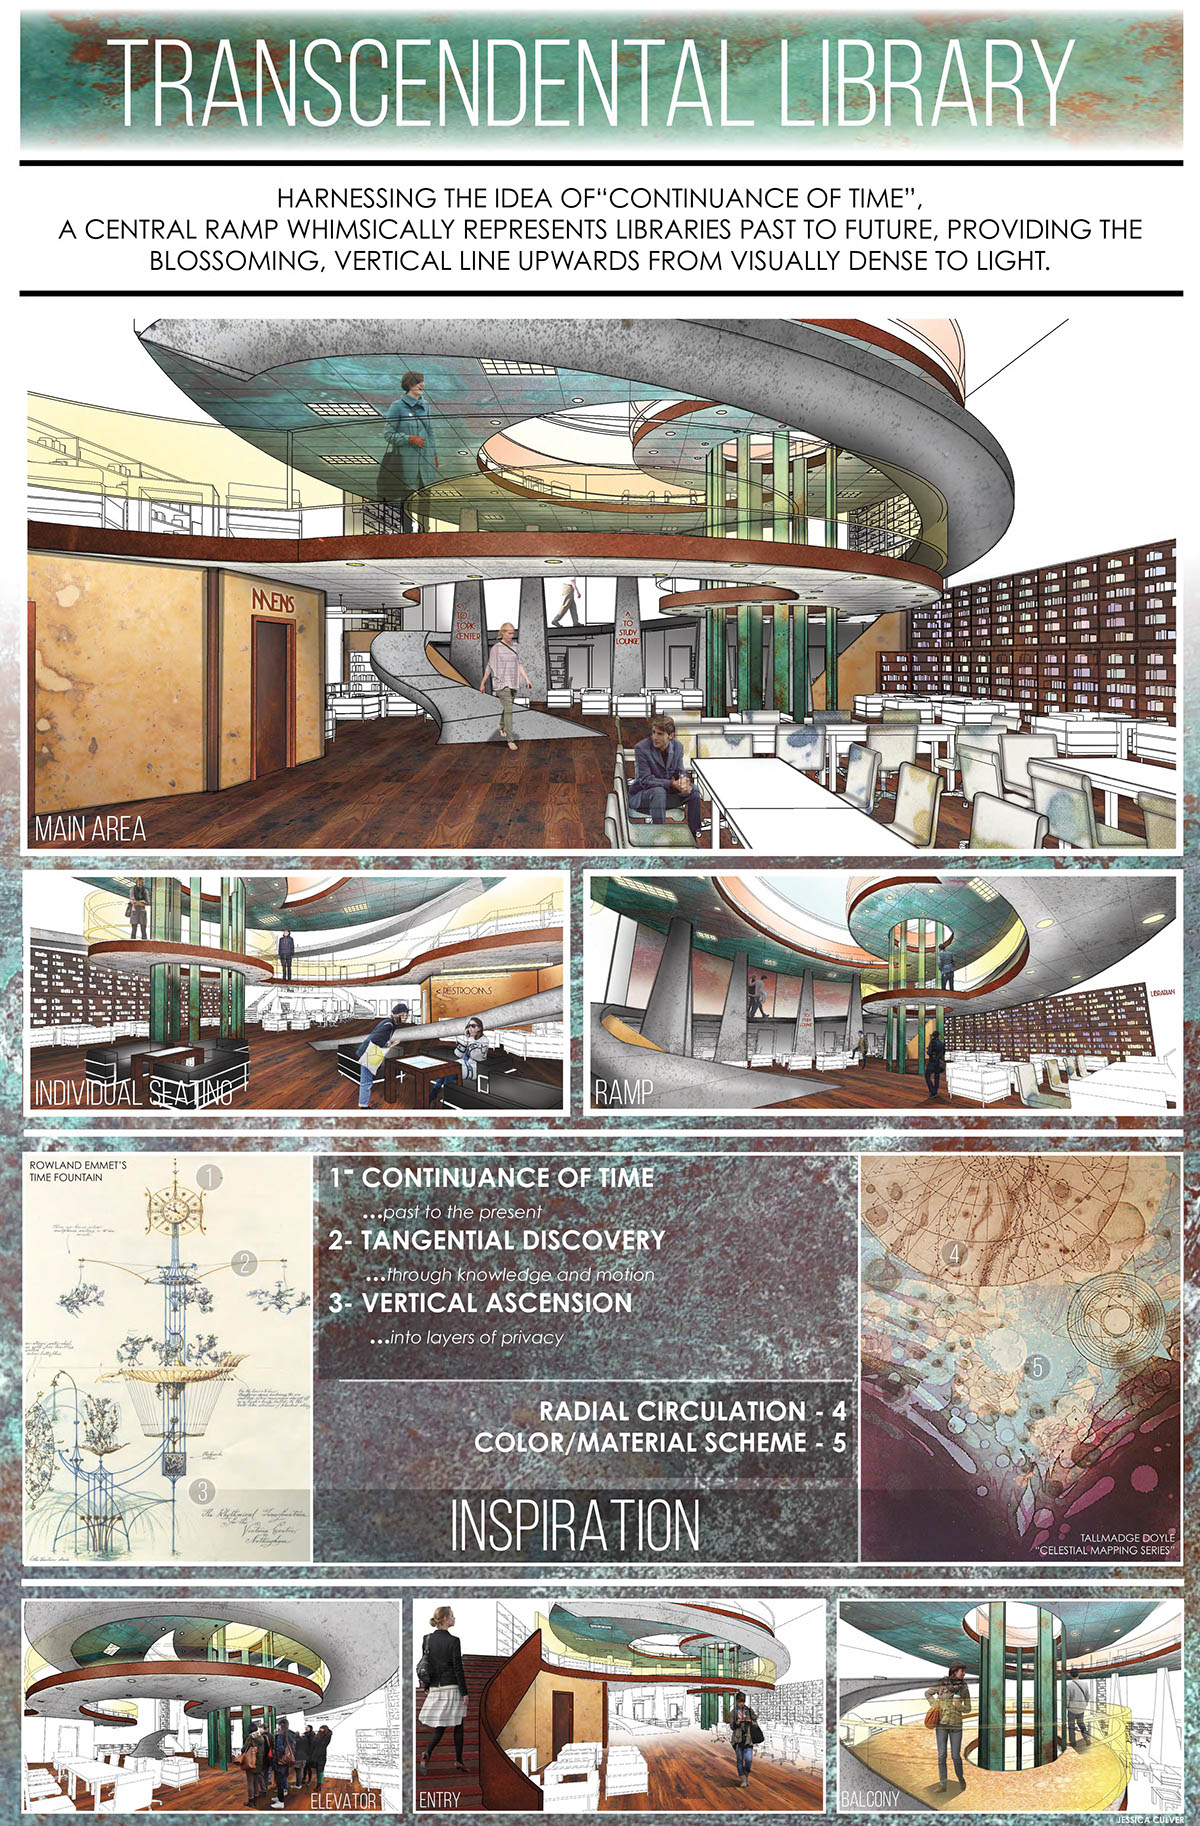 library future Technology metals materials Ramp ceiling time inspiration art rendering revit photoshop InDesign poster